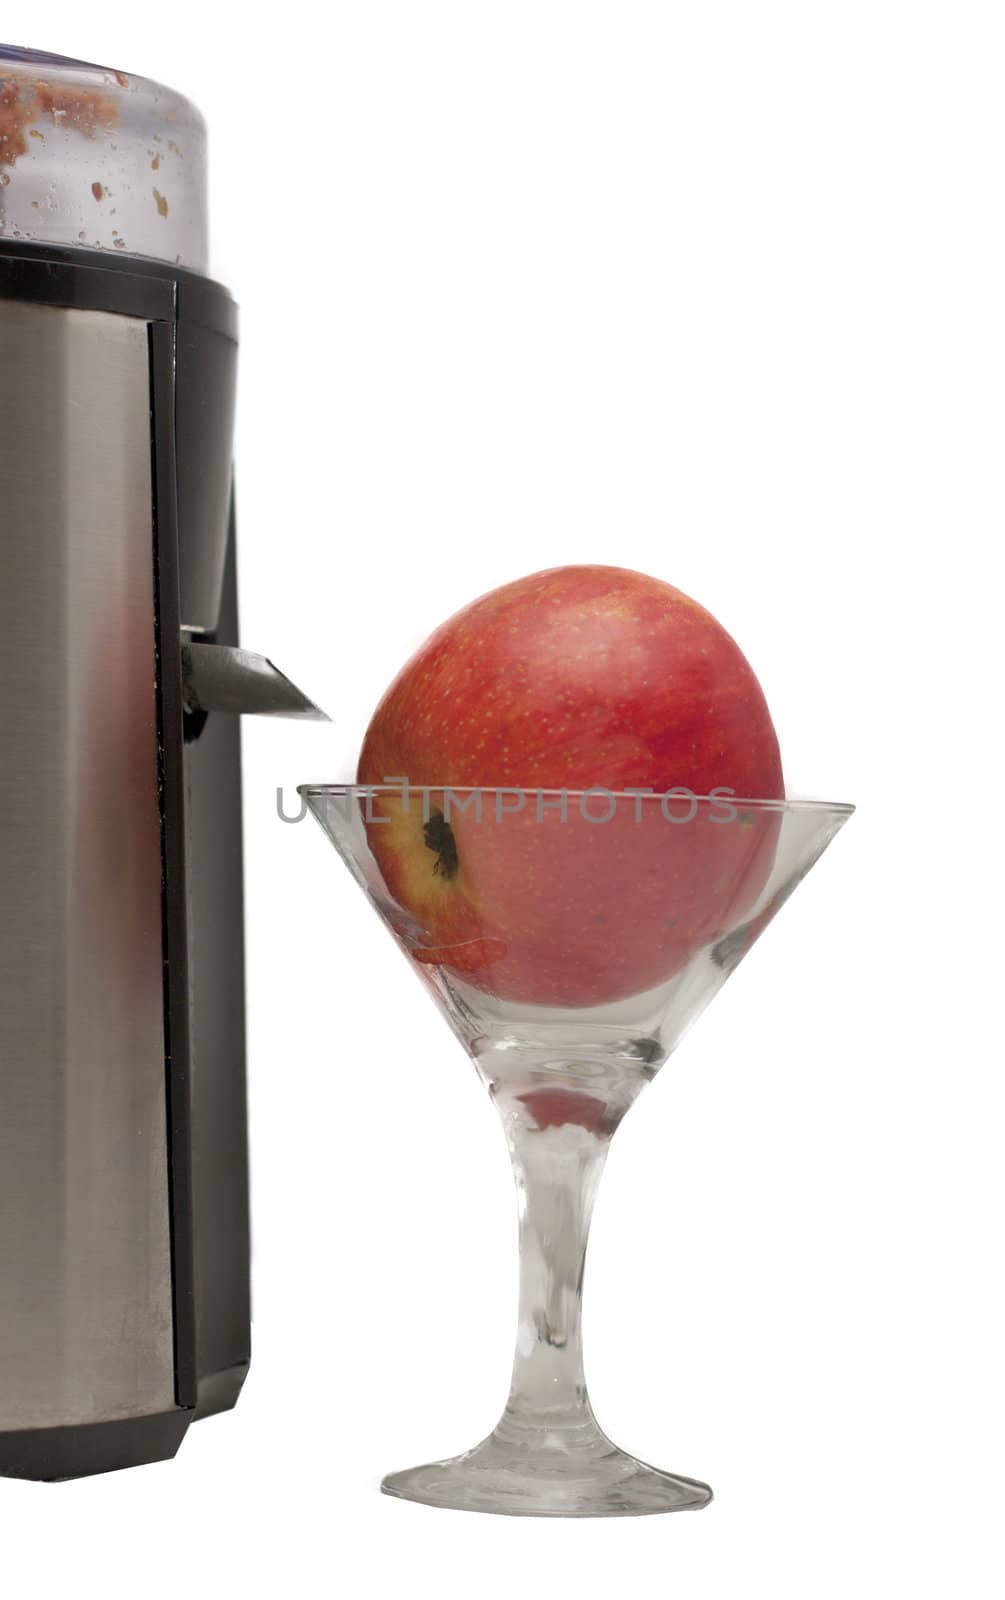 apple in a glass and a juicer on a white background